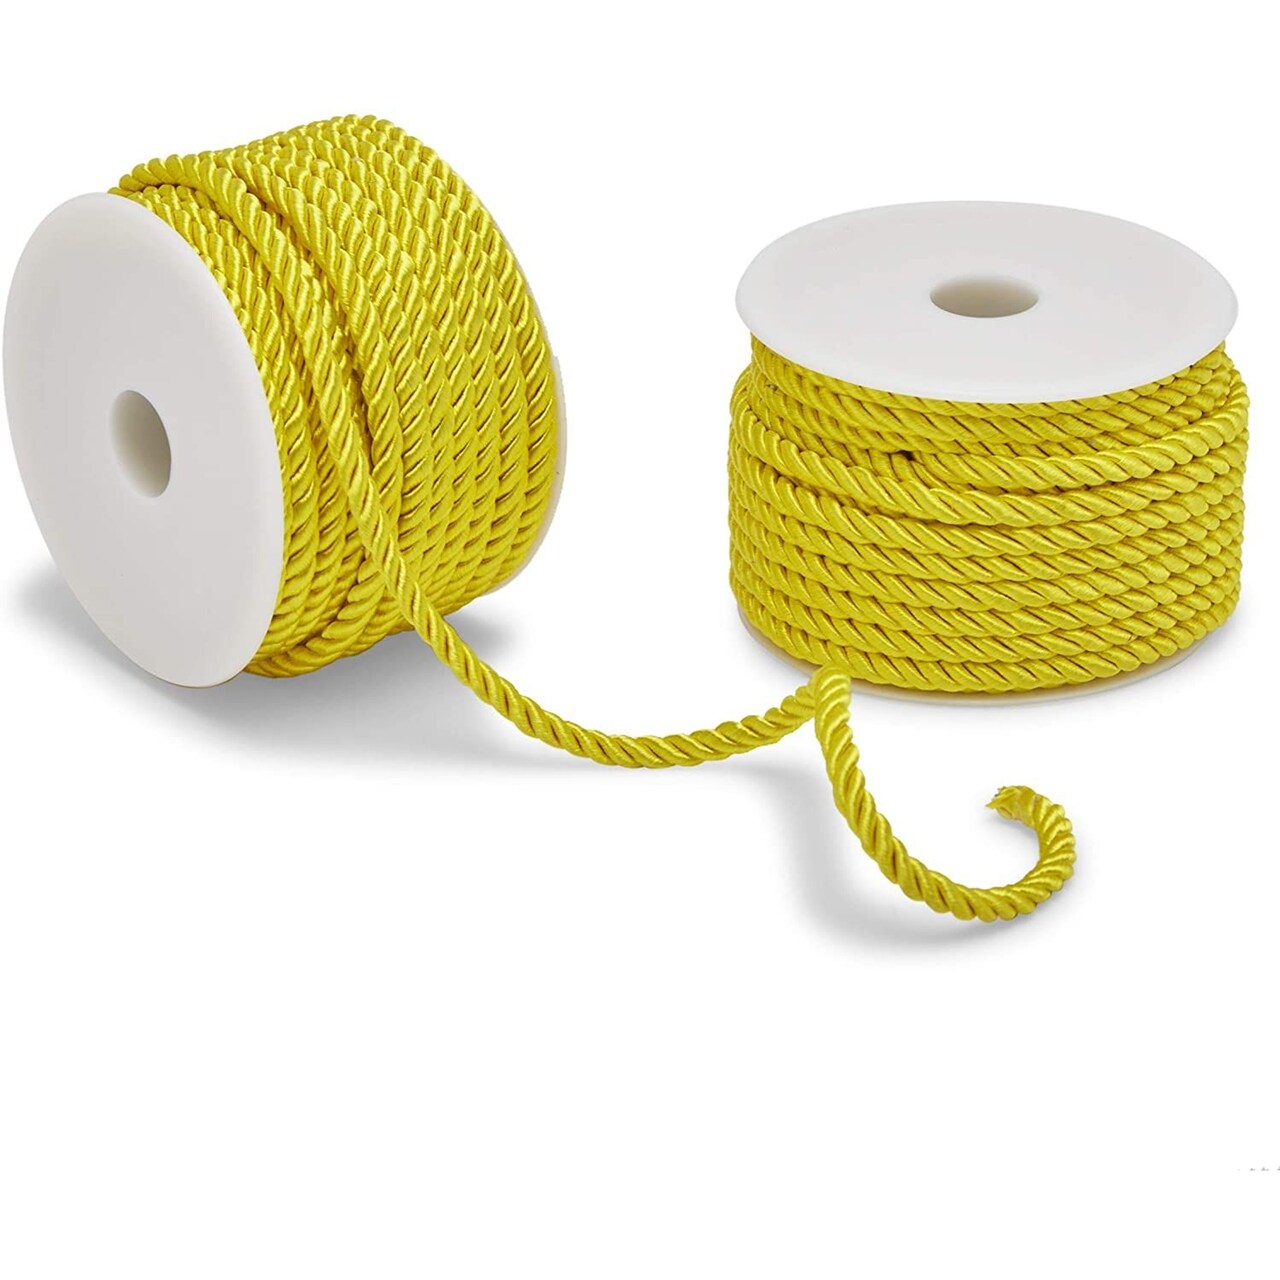 Gold Nylon Twisted Cord Trim Rope for Crafts (36 Yards, 2 Pack